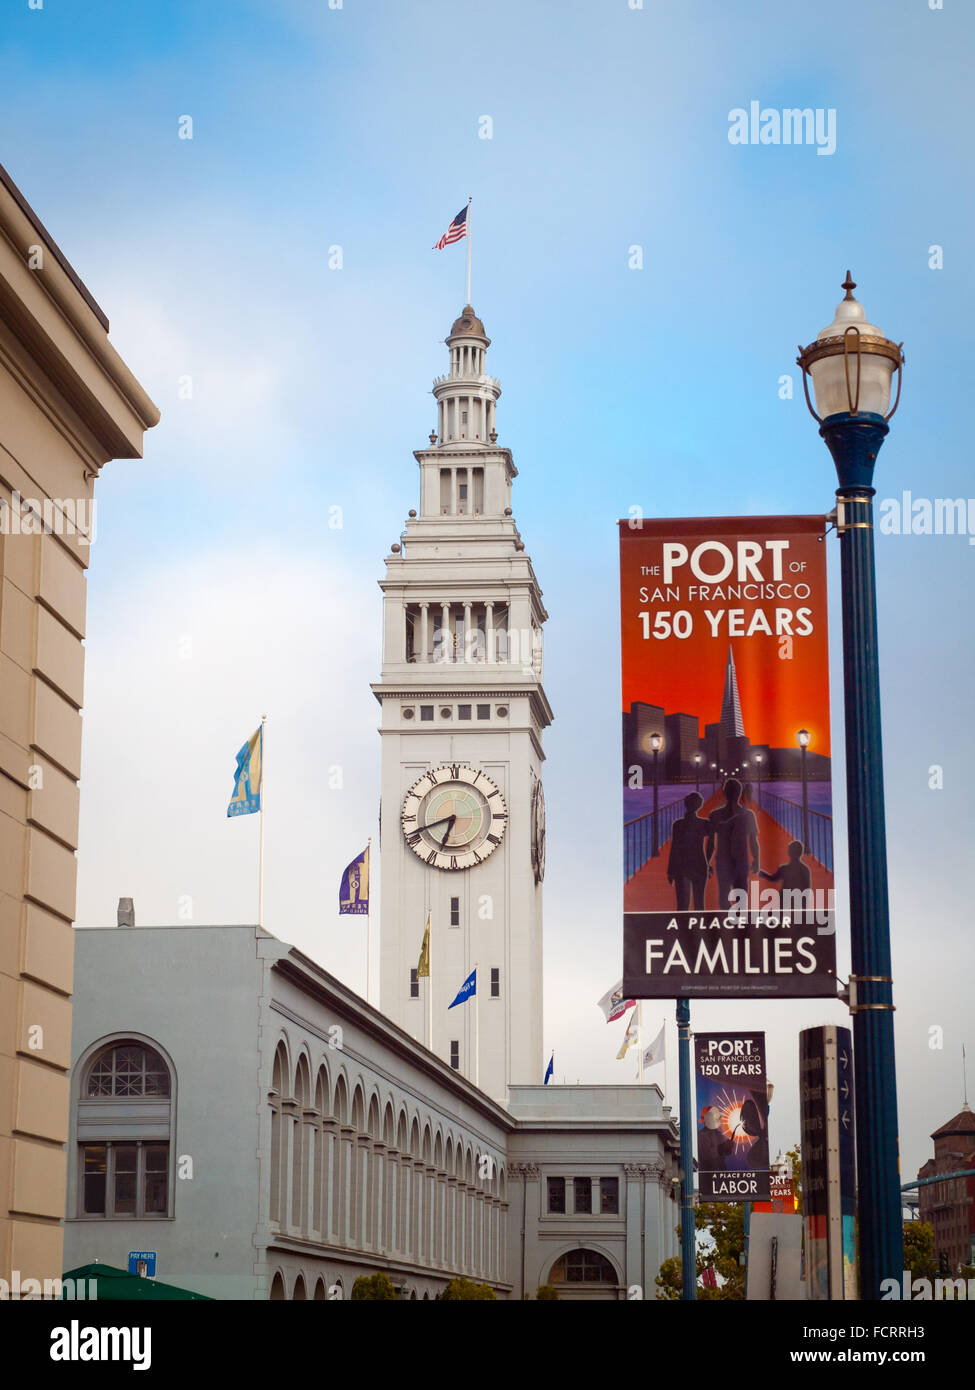 A view of the clock tower of the San Francisco Ferry Building, as seen from the Embarcadero in San Francisco, California. Stock Photo